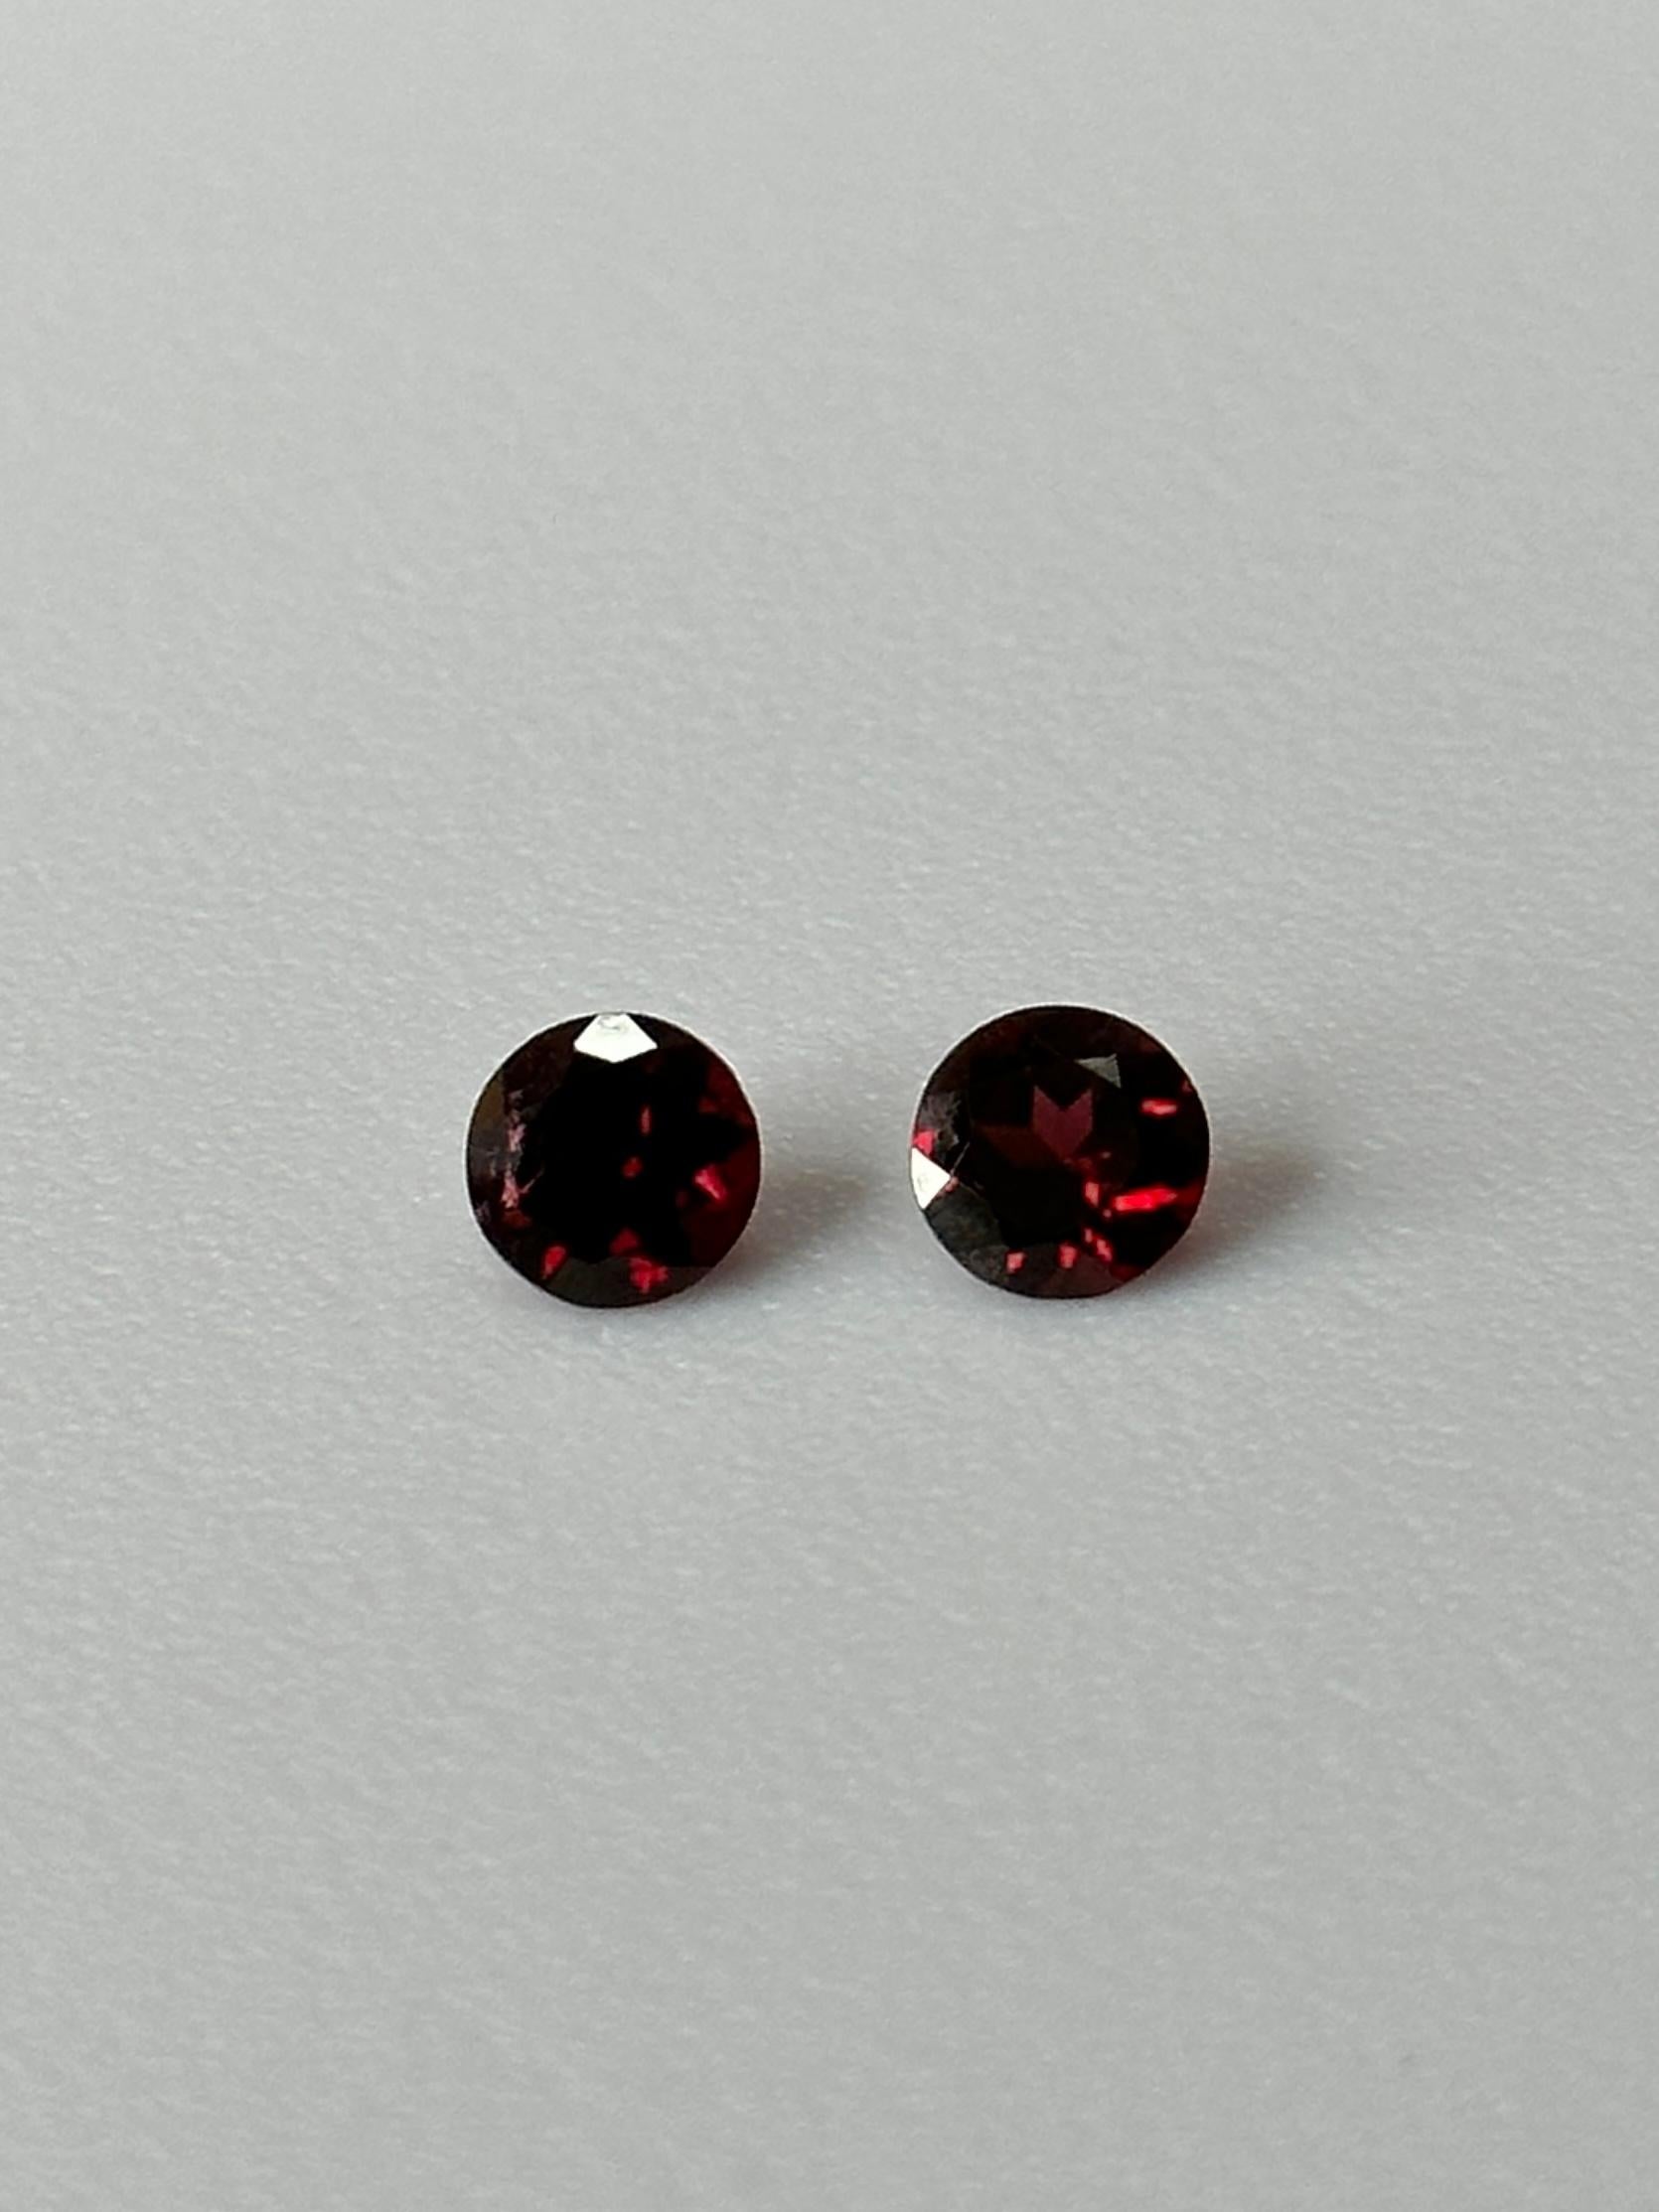 A glamorous pair of Brilliant Cut Pyrope-Almandine Garnets.
Garnet is quite a common mineral that can be found all throughout the world in various different colors ranging from green to red in the color spectrum.
However Pyrope garnets are